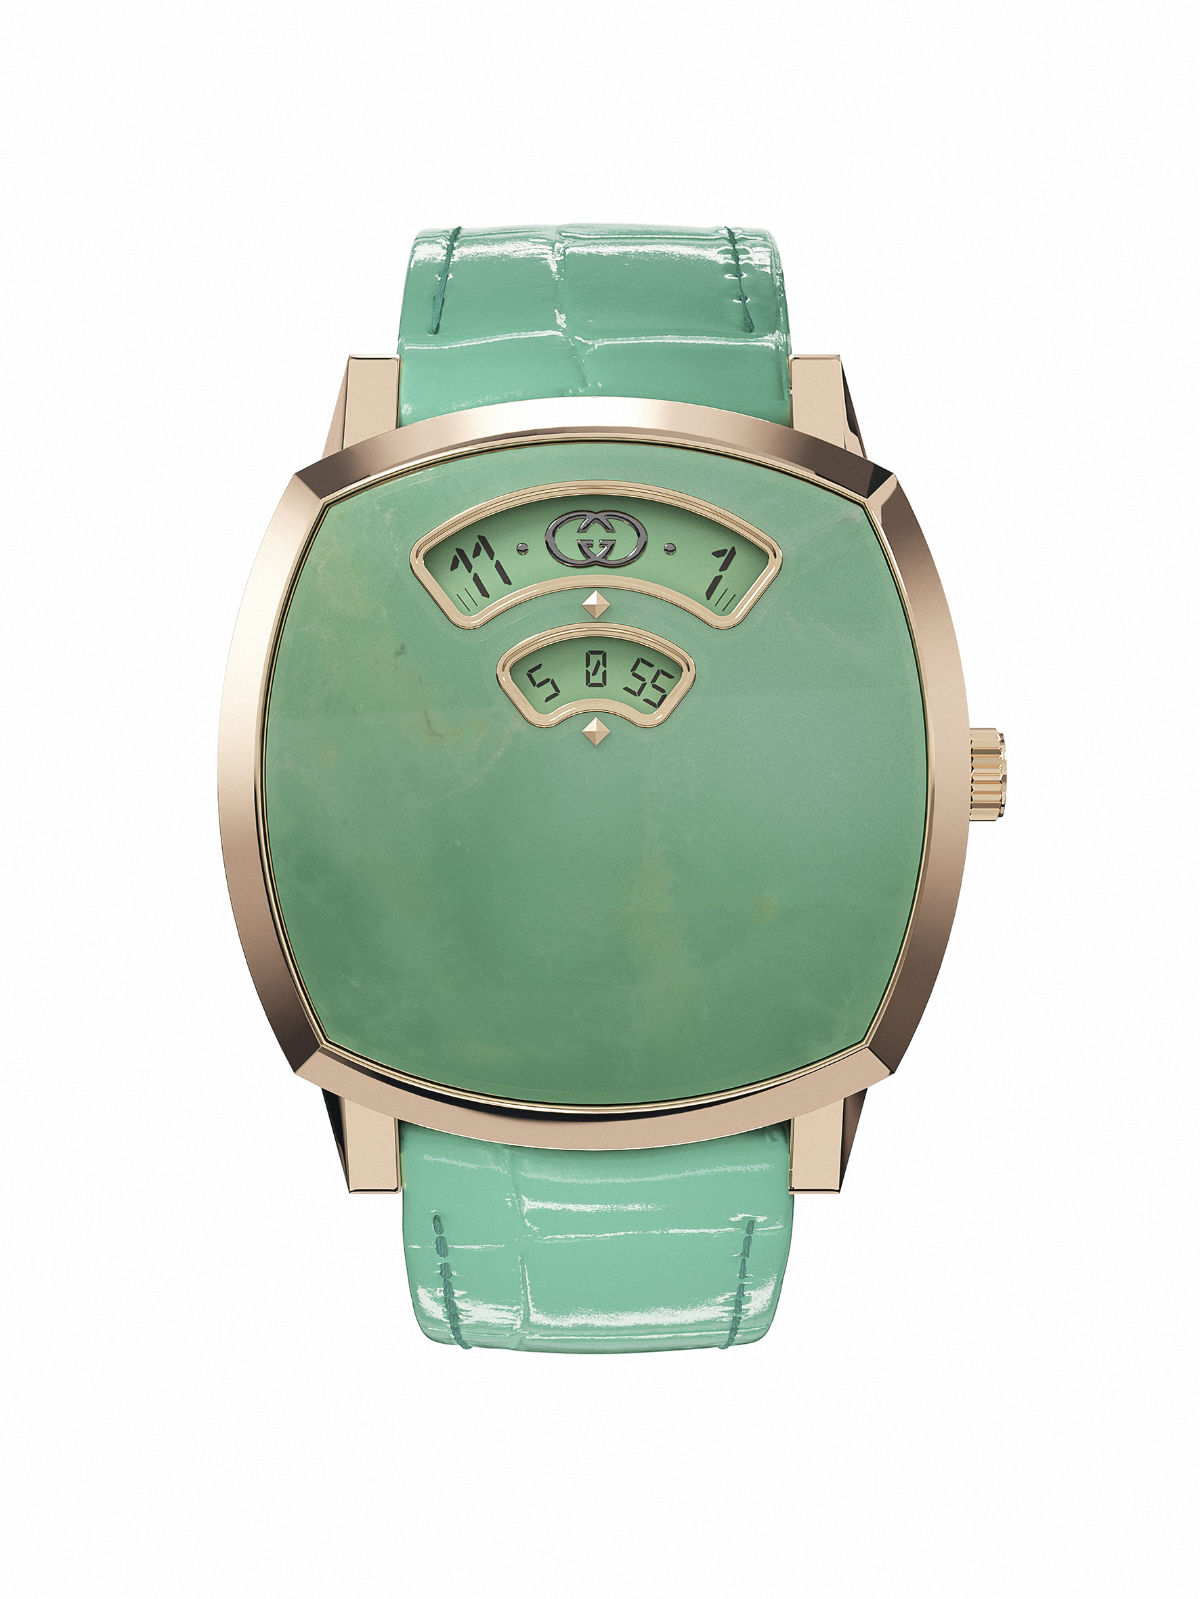 Gucci Presents Its New High Watchmaking 2023 Collection